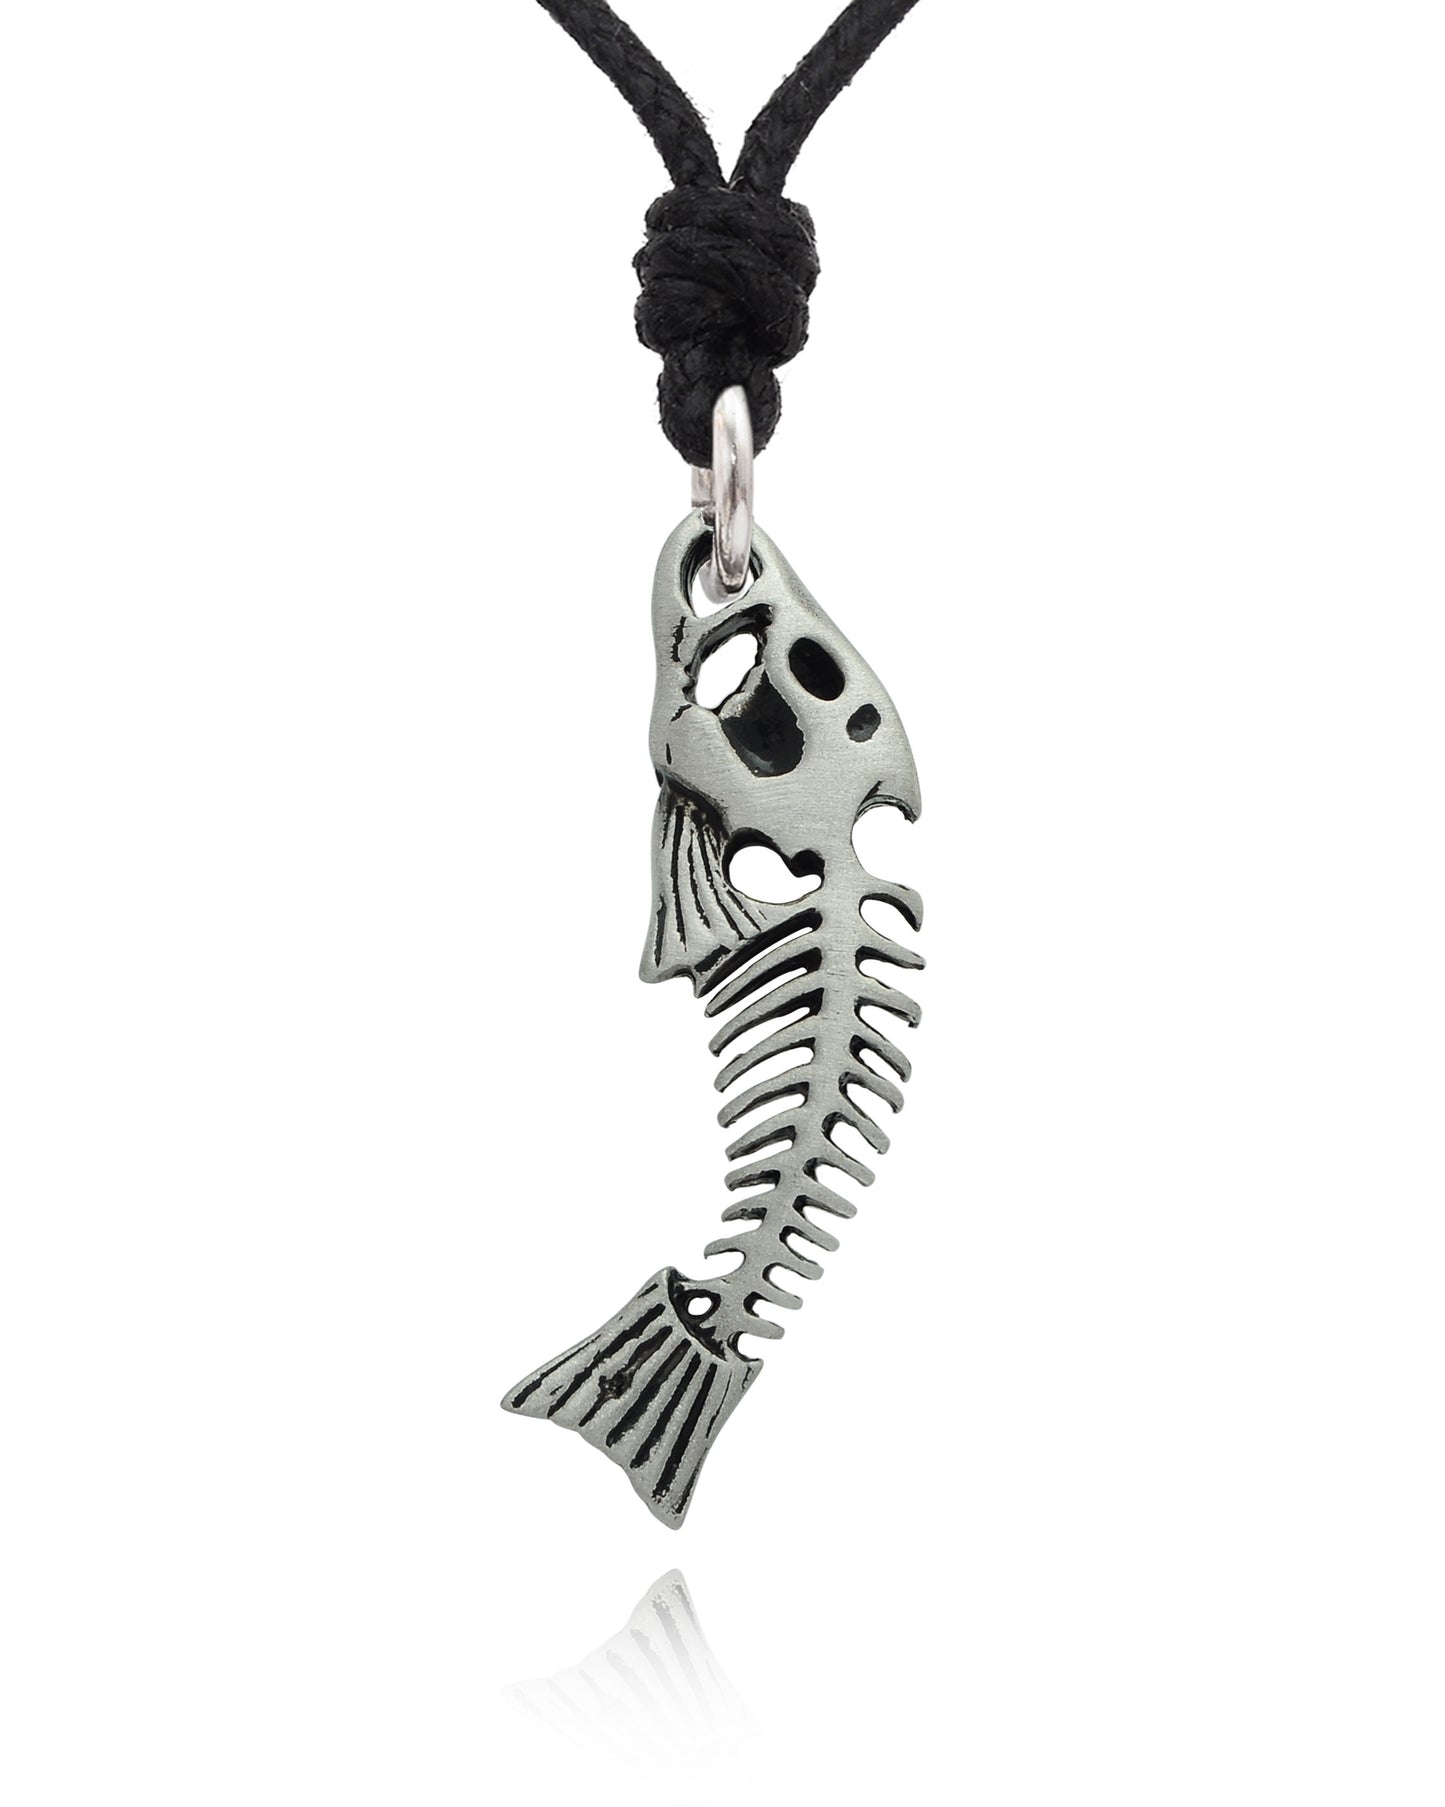 Stylish Fish Skeleton Silver Pewter Gold Brass  Charm Necklace Pendant Jewelry